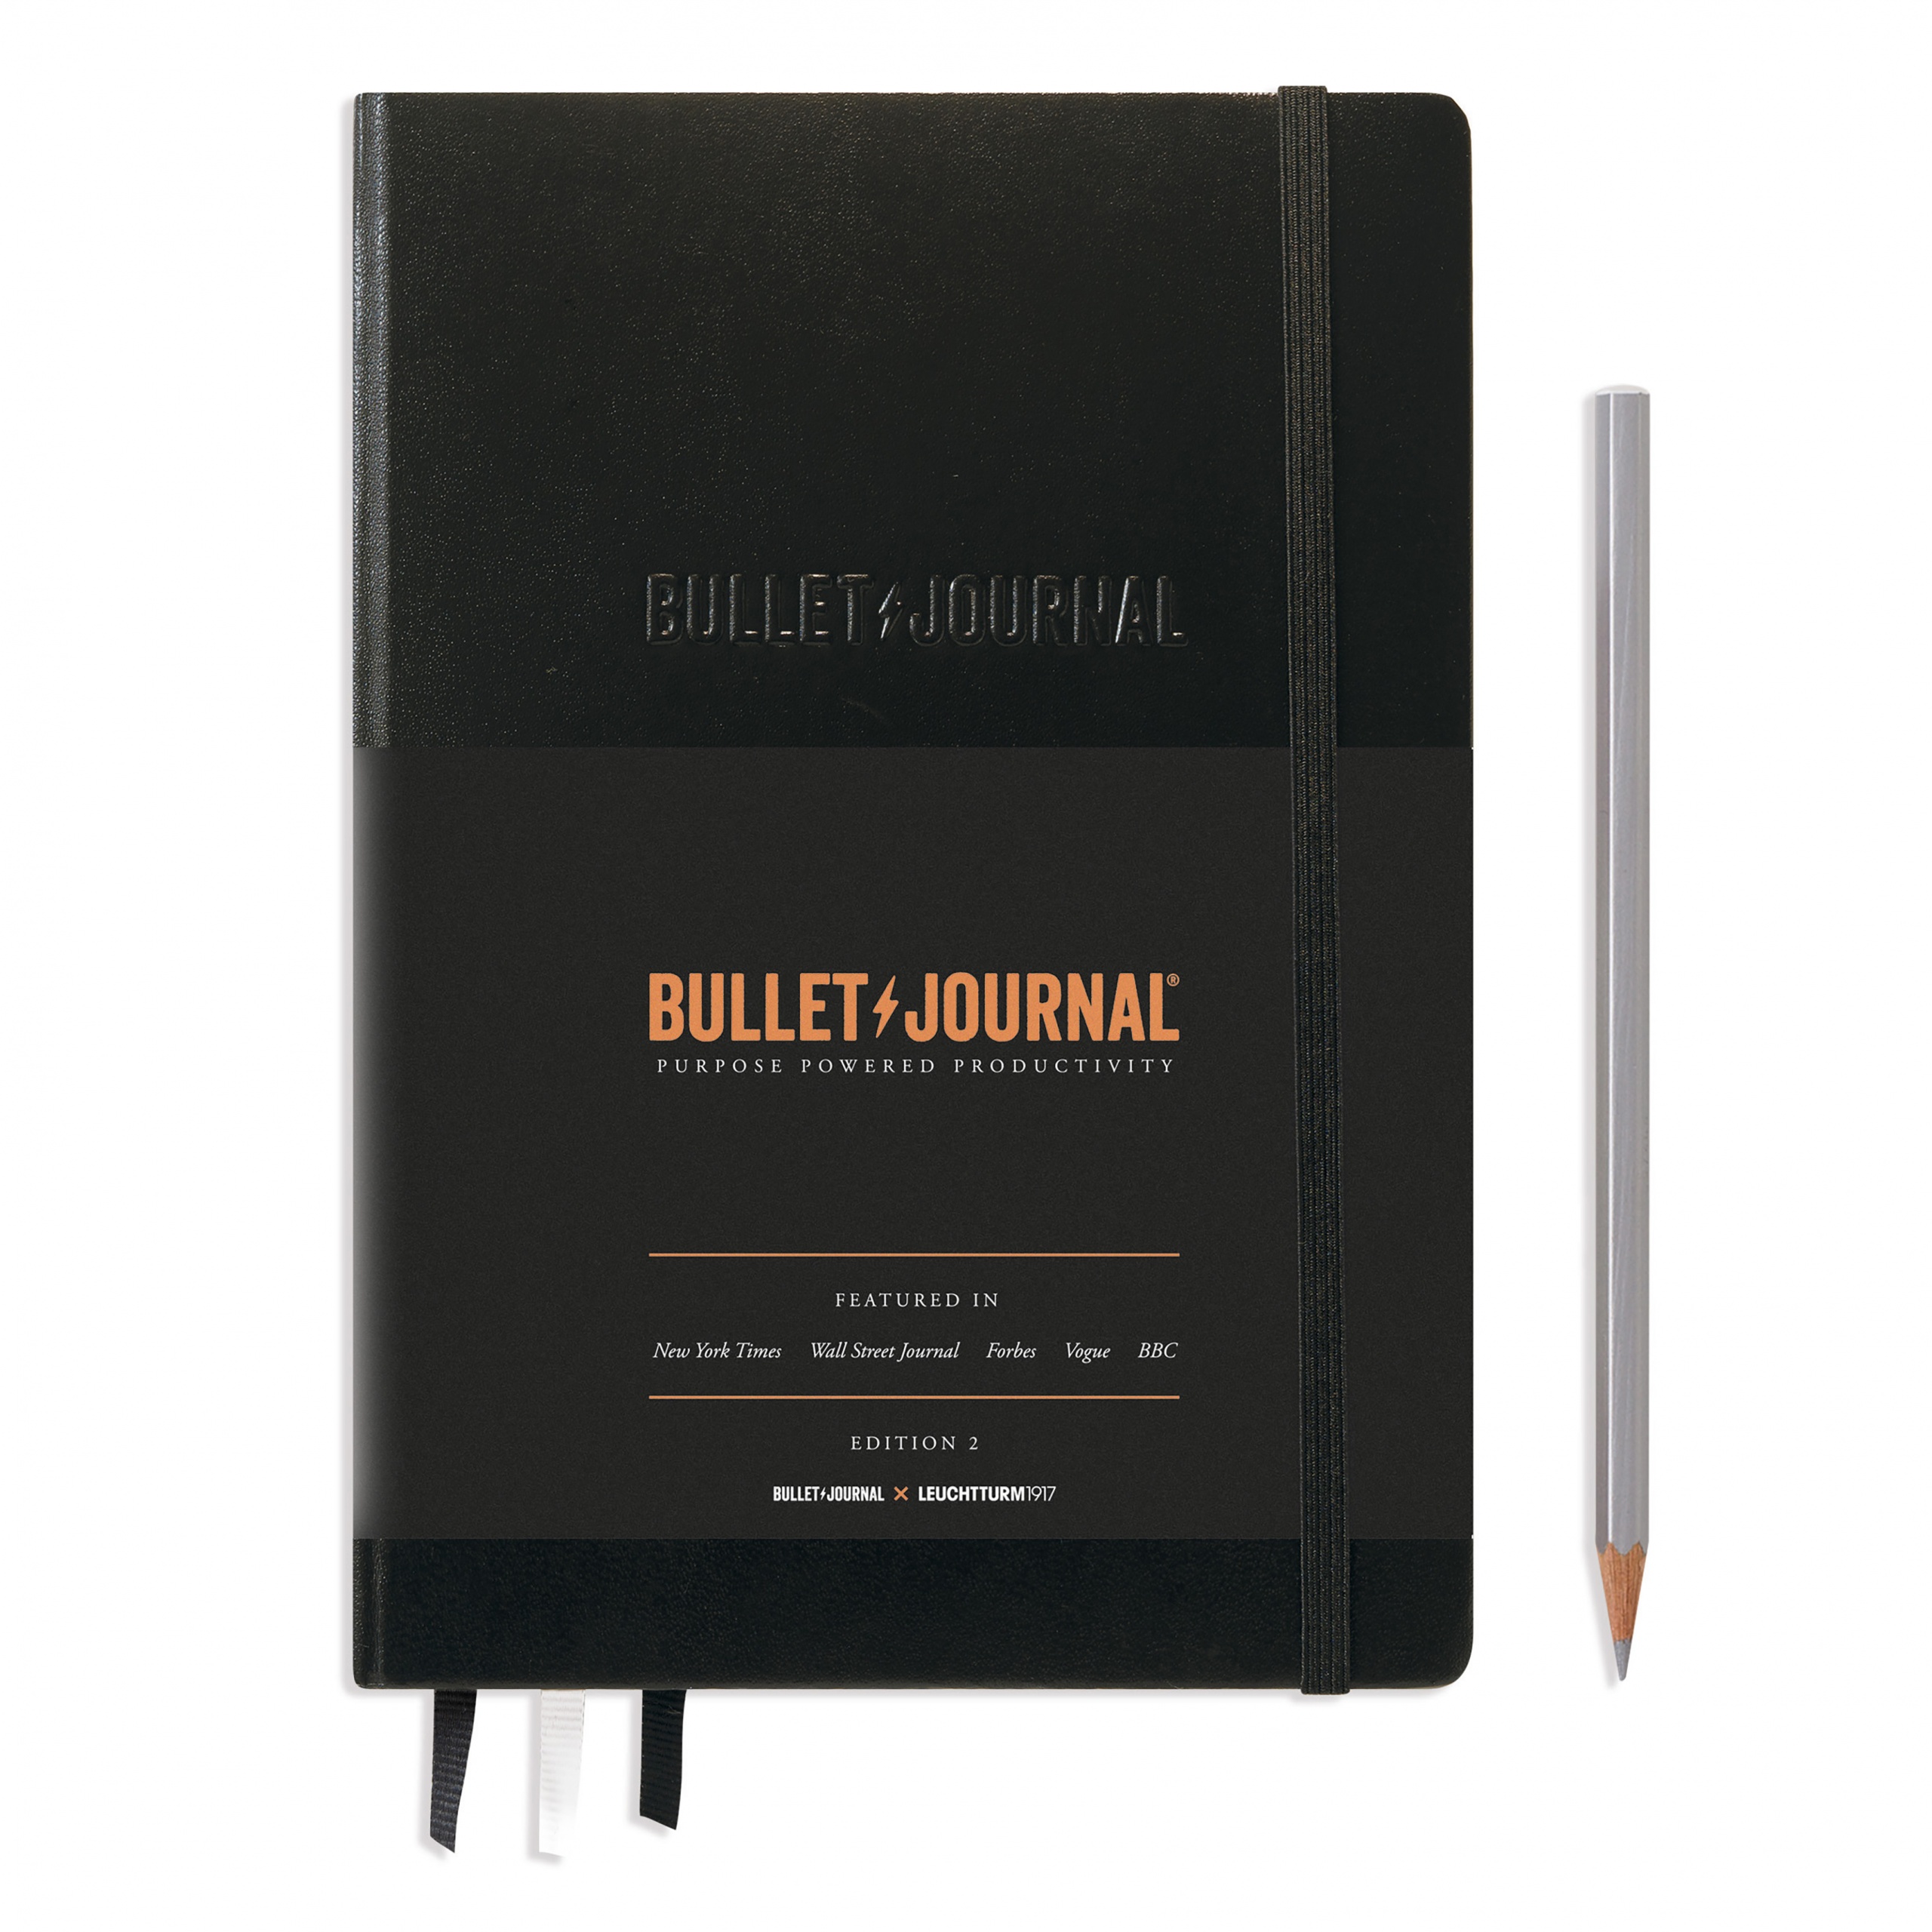 For Bullet Journal Kit Classic Hardcover Notebook A5 120g Acid-free paper